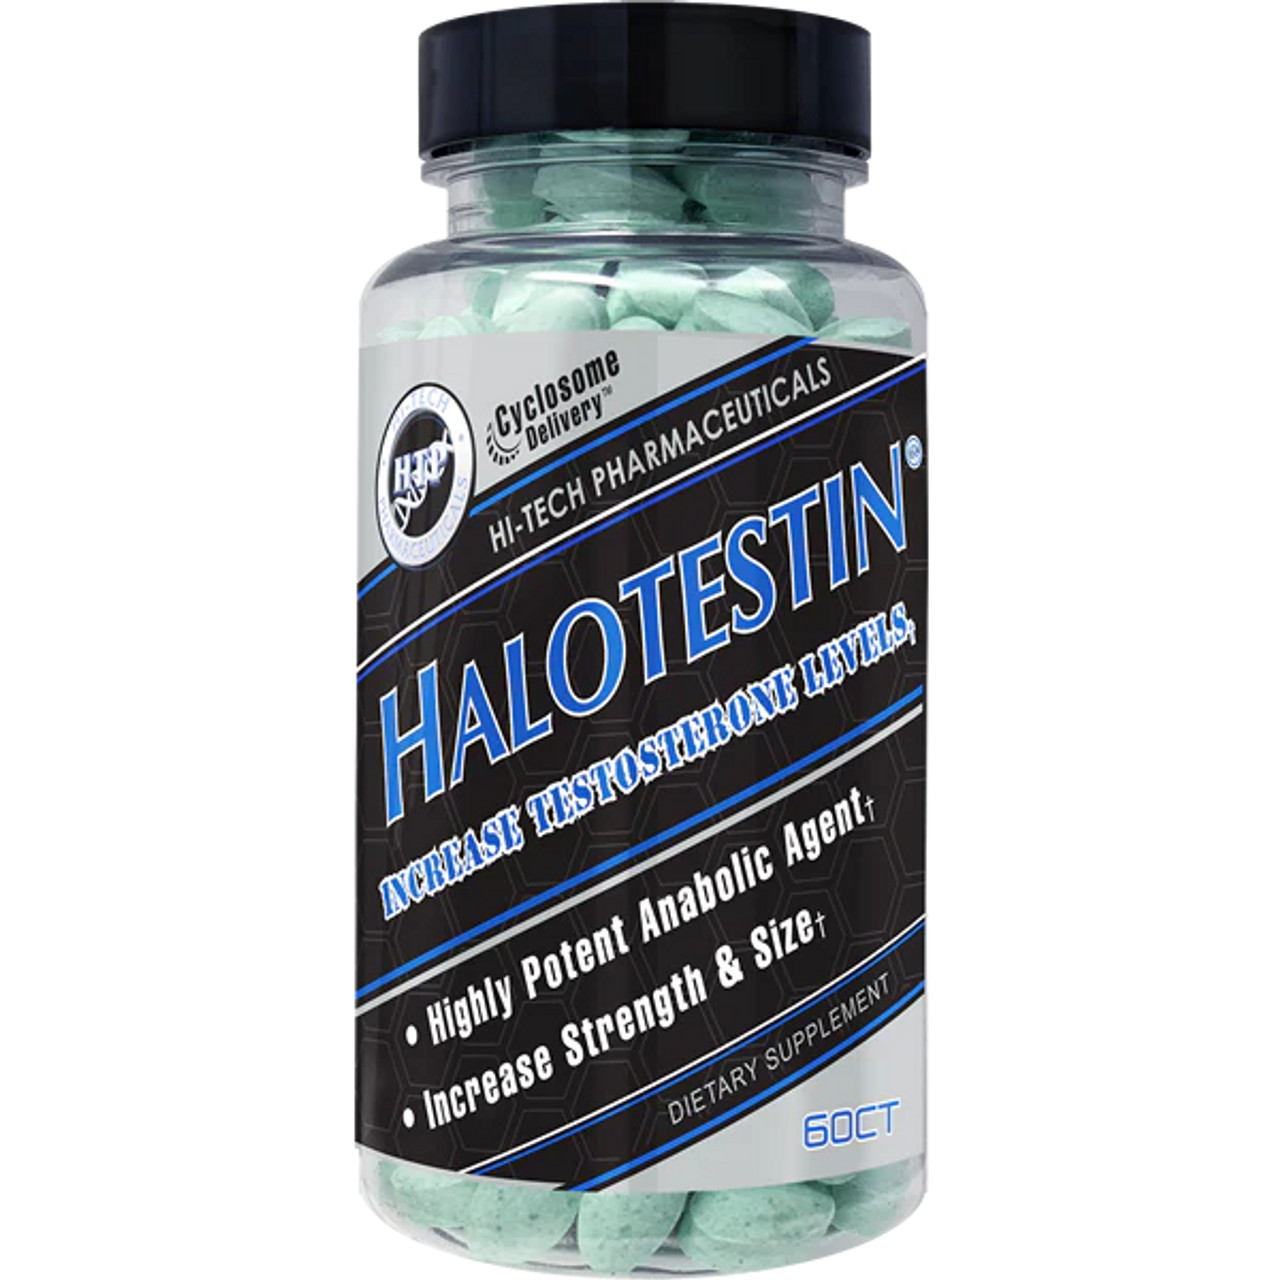 Halotestin 60ct by Hi-Tech Pharmaceuticals